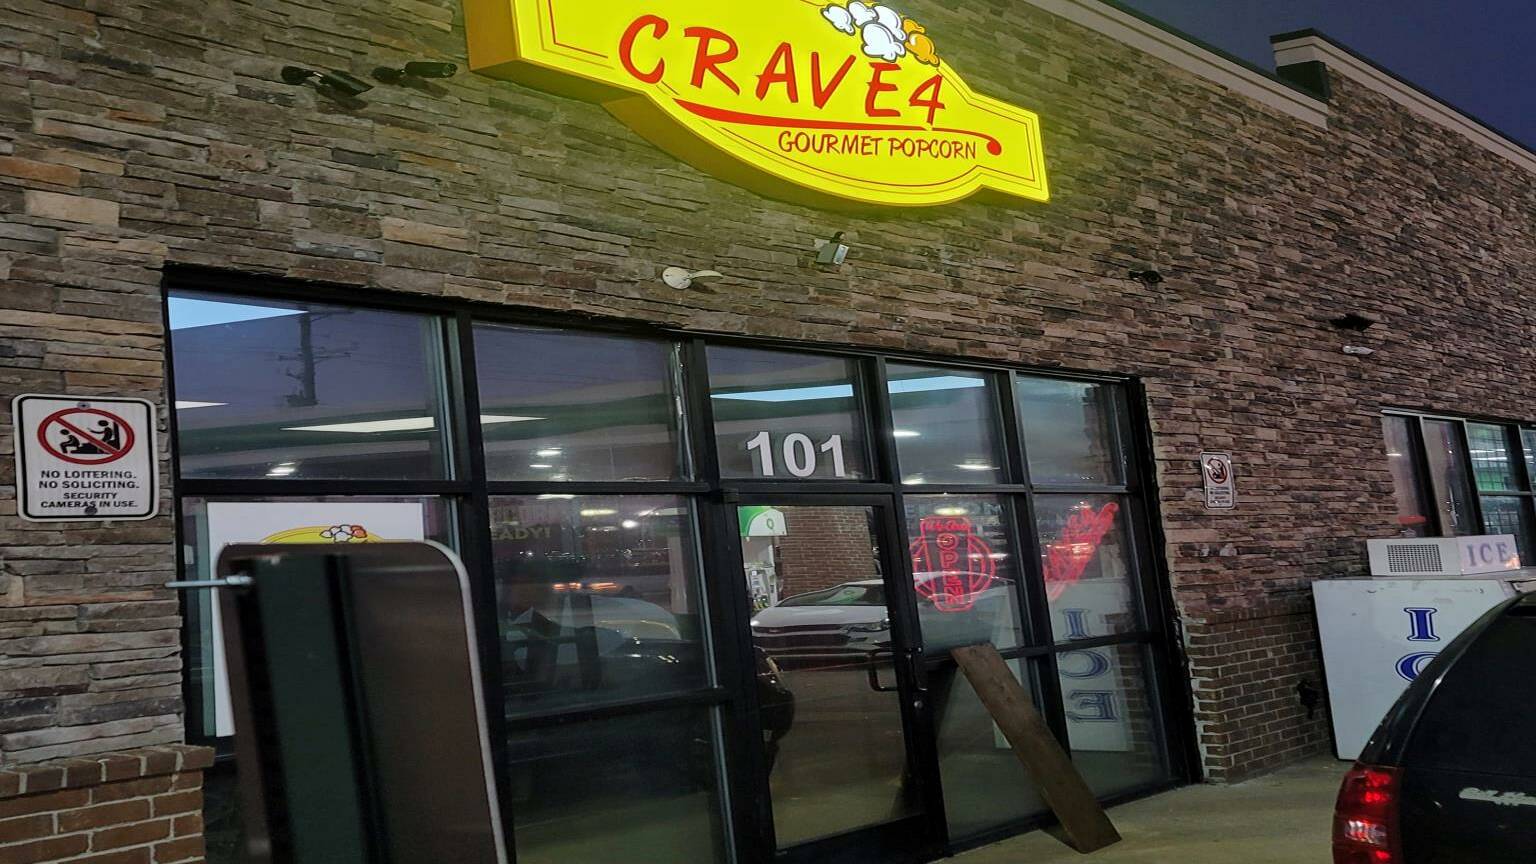 Crave4 Gourmet Popcorn's new storefront located in Memphis, TN and shipping nationwide